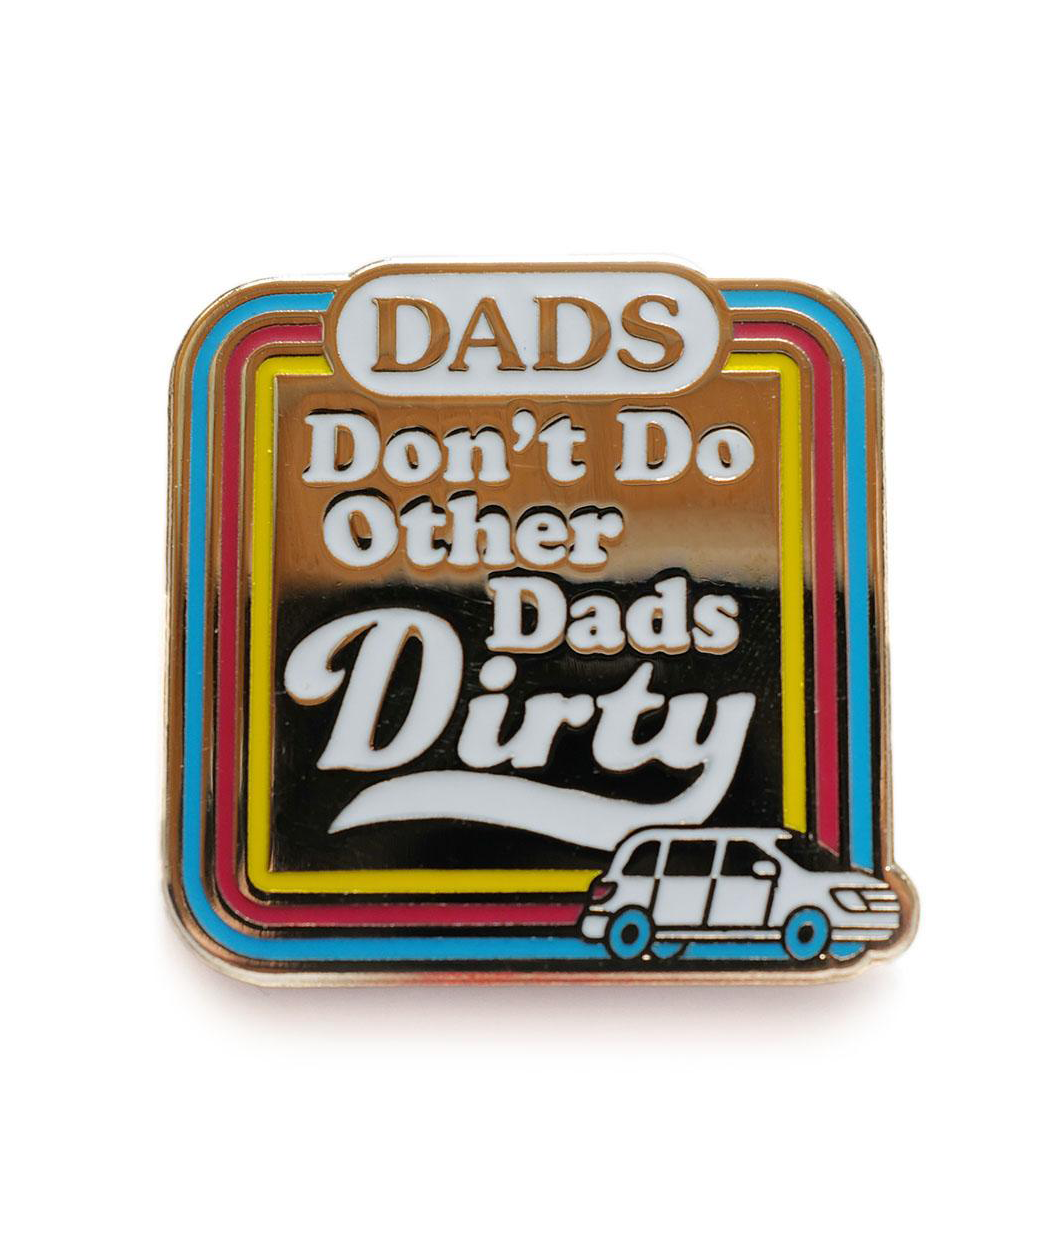 Square old enamel pin with 70s style yellow, blue, and reddish pin border lines. Illustrated white text of ,"DADS Don't Do Other Dads Dirty" with Dirty being larger than the other words. A white Honda Odyssey sits in the lower right corner of the pin with blue wheels.